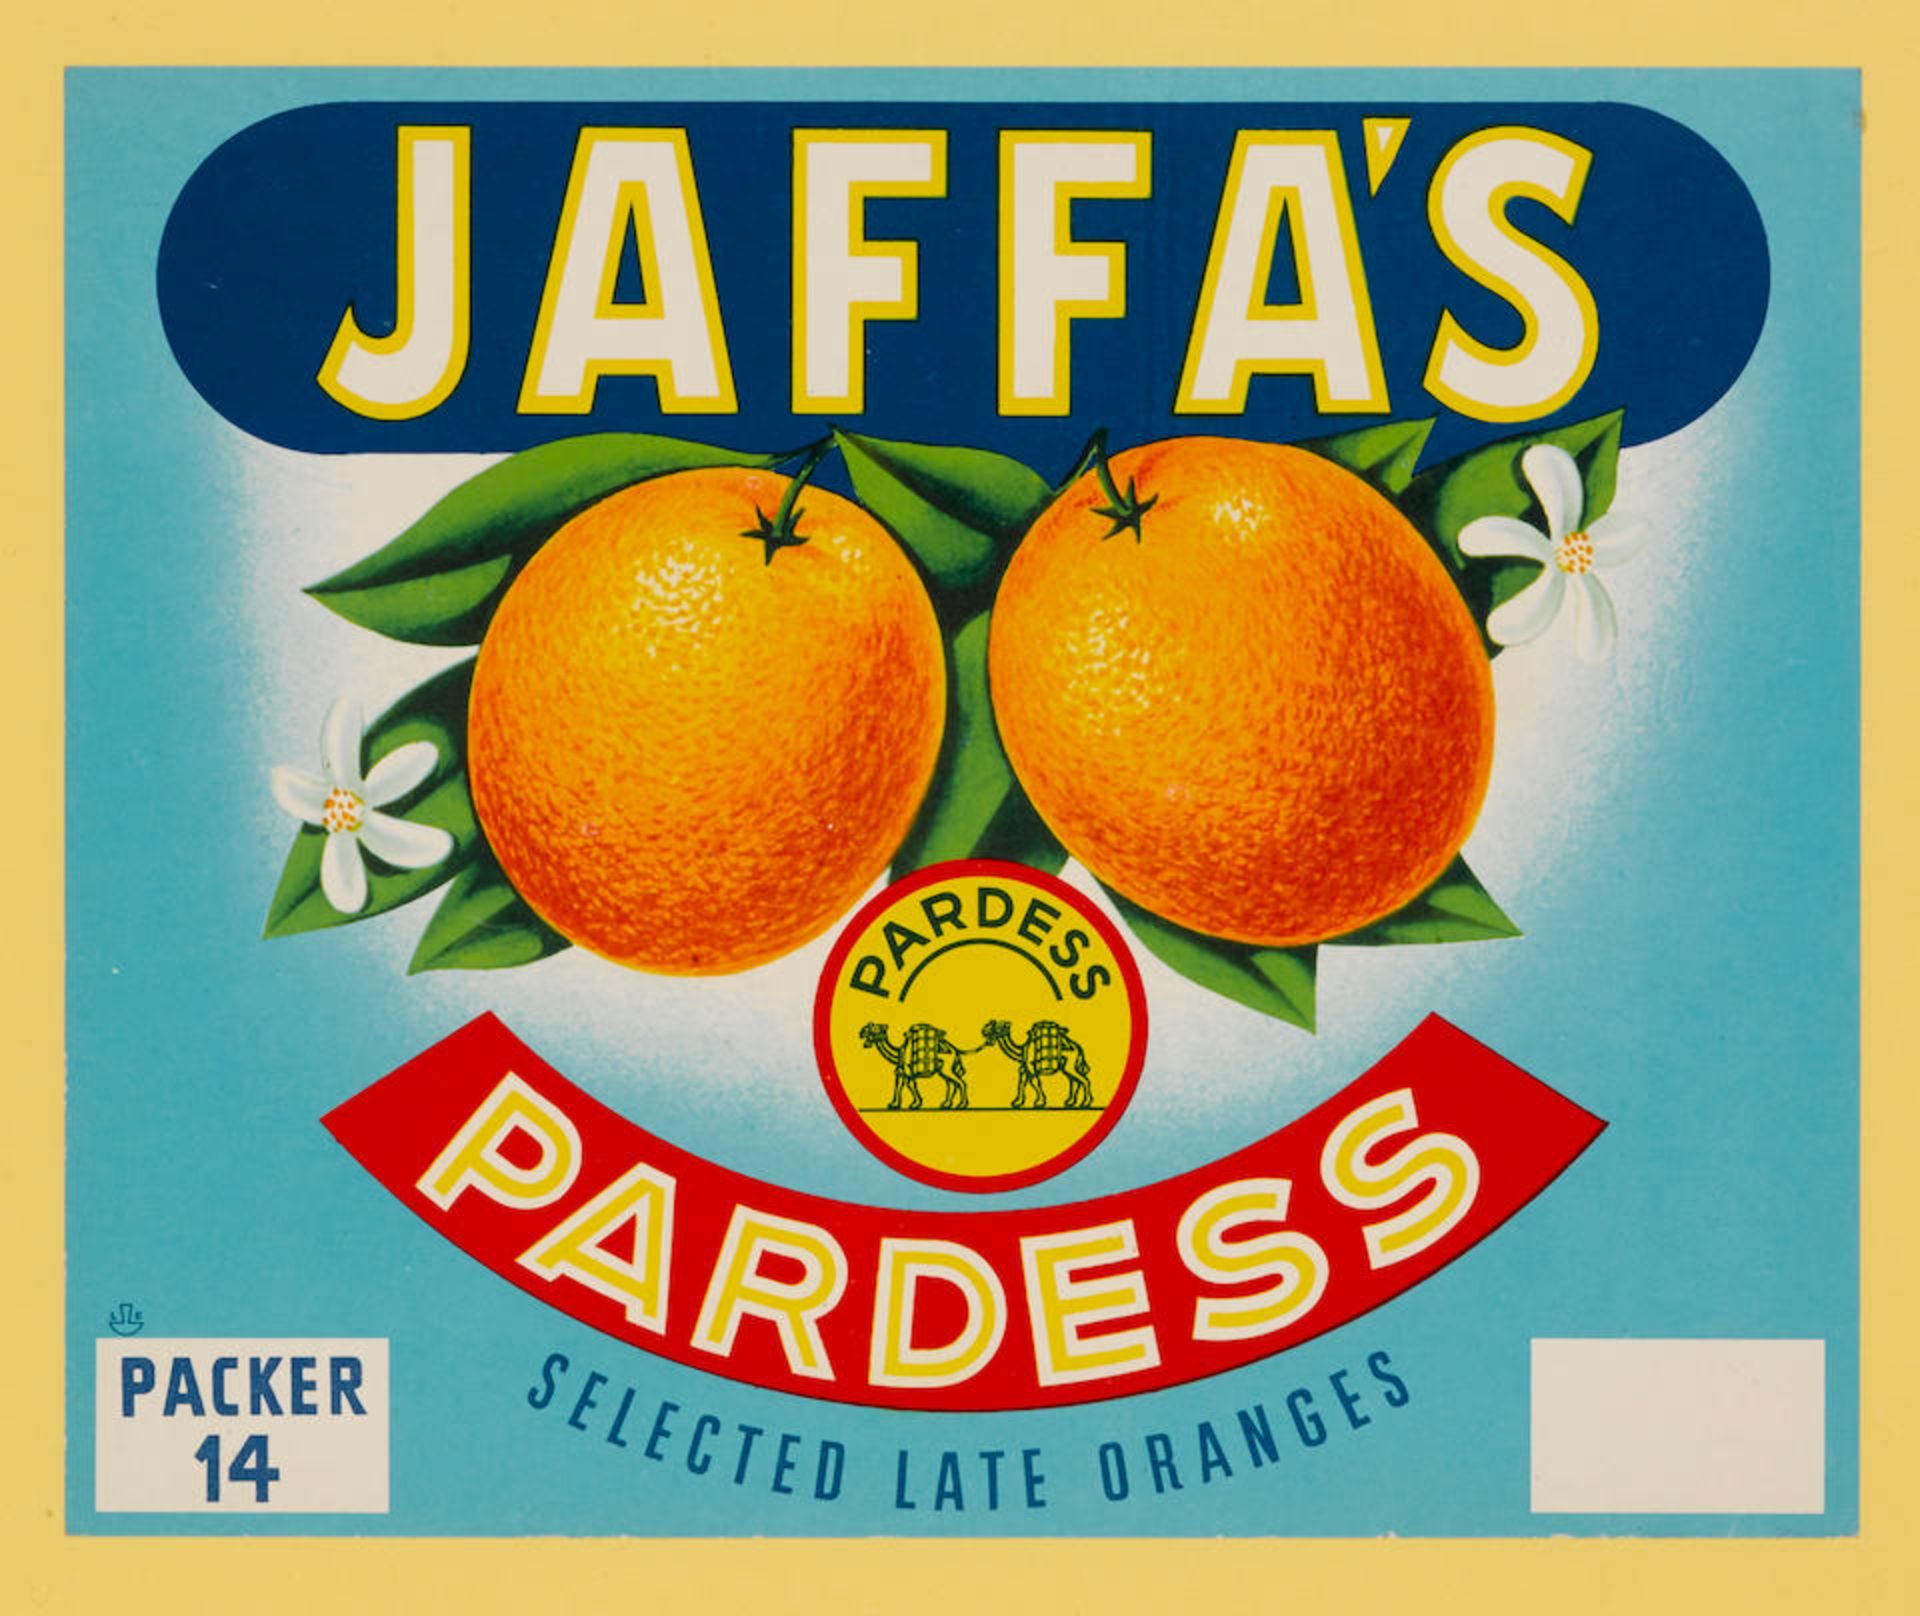 JAFFA'S PARDESS, SELECTED LATE ORANGES, c.1950 lithographic poster printed by Levin Epshtein